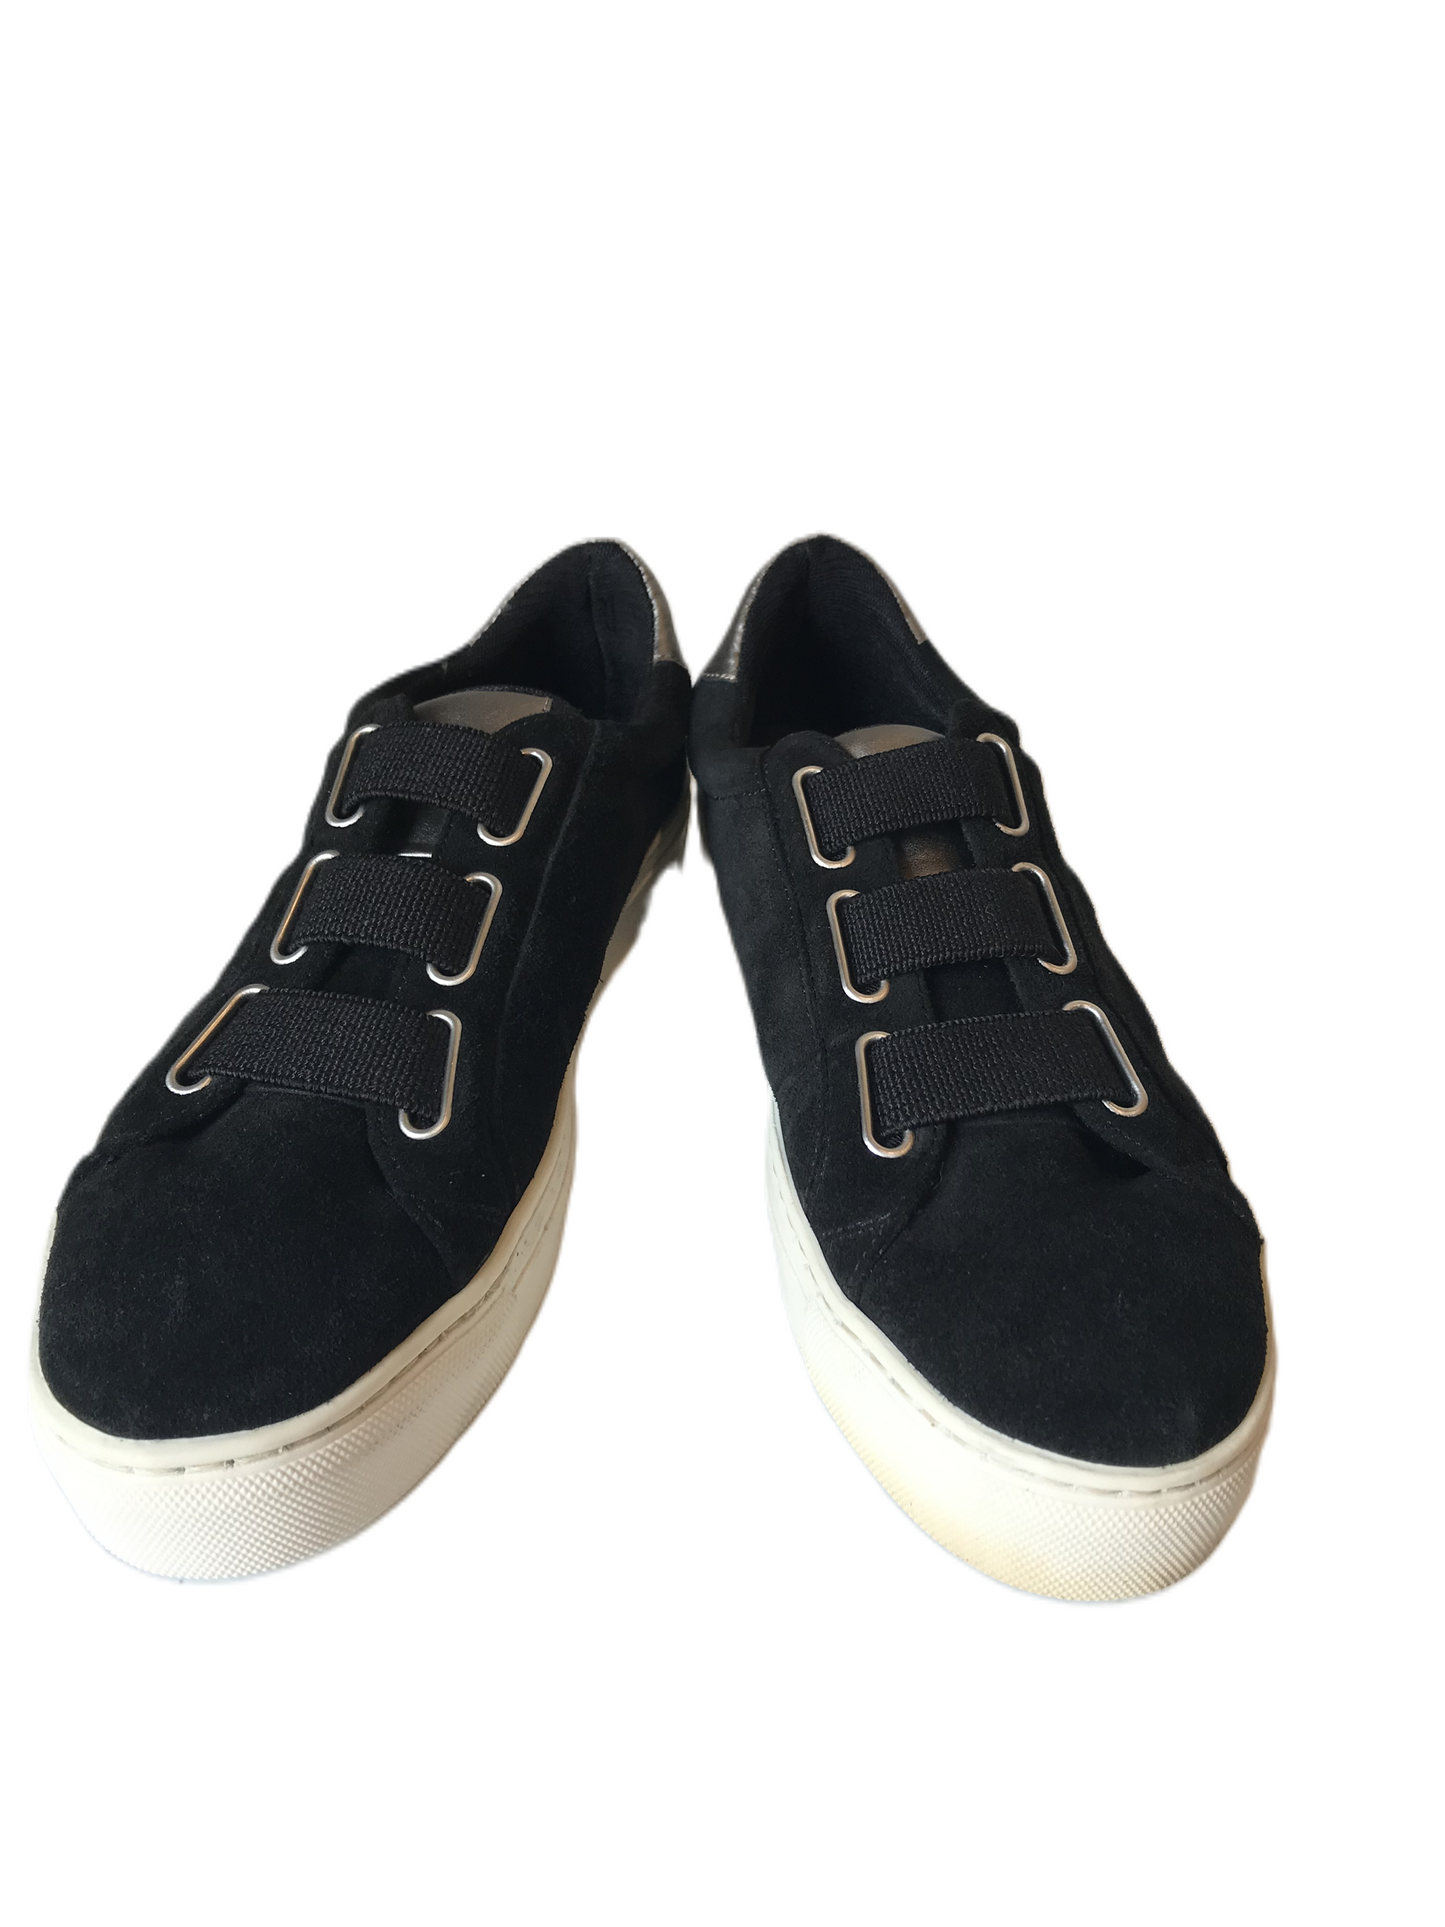 Black Shoes Sneakers By The Flexx  Size: 8.5